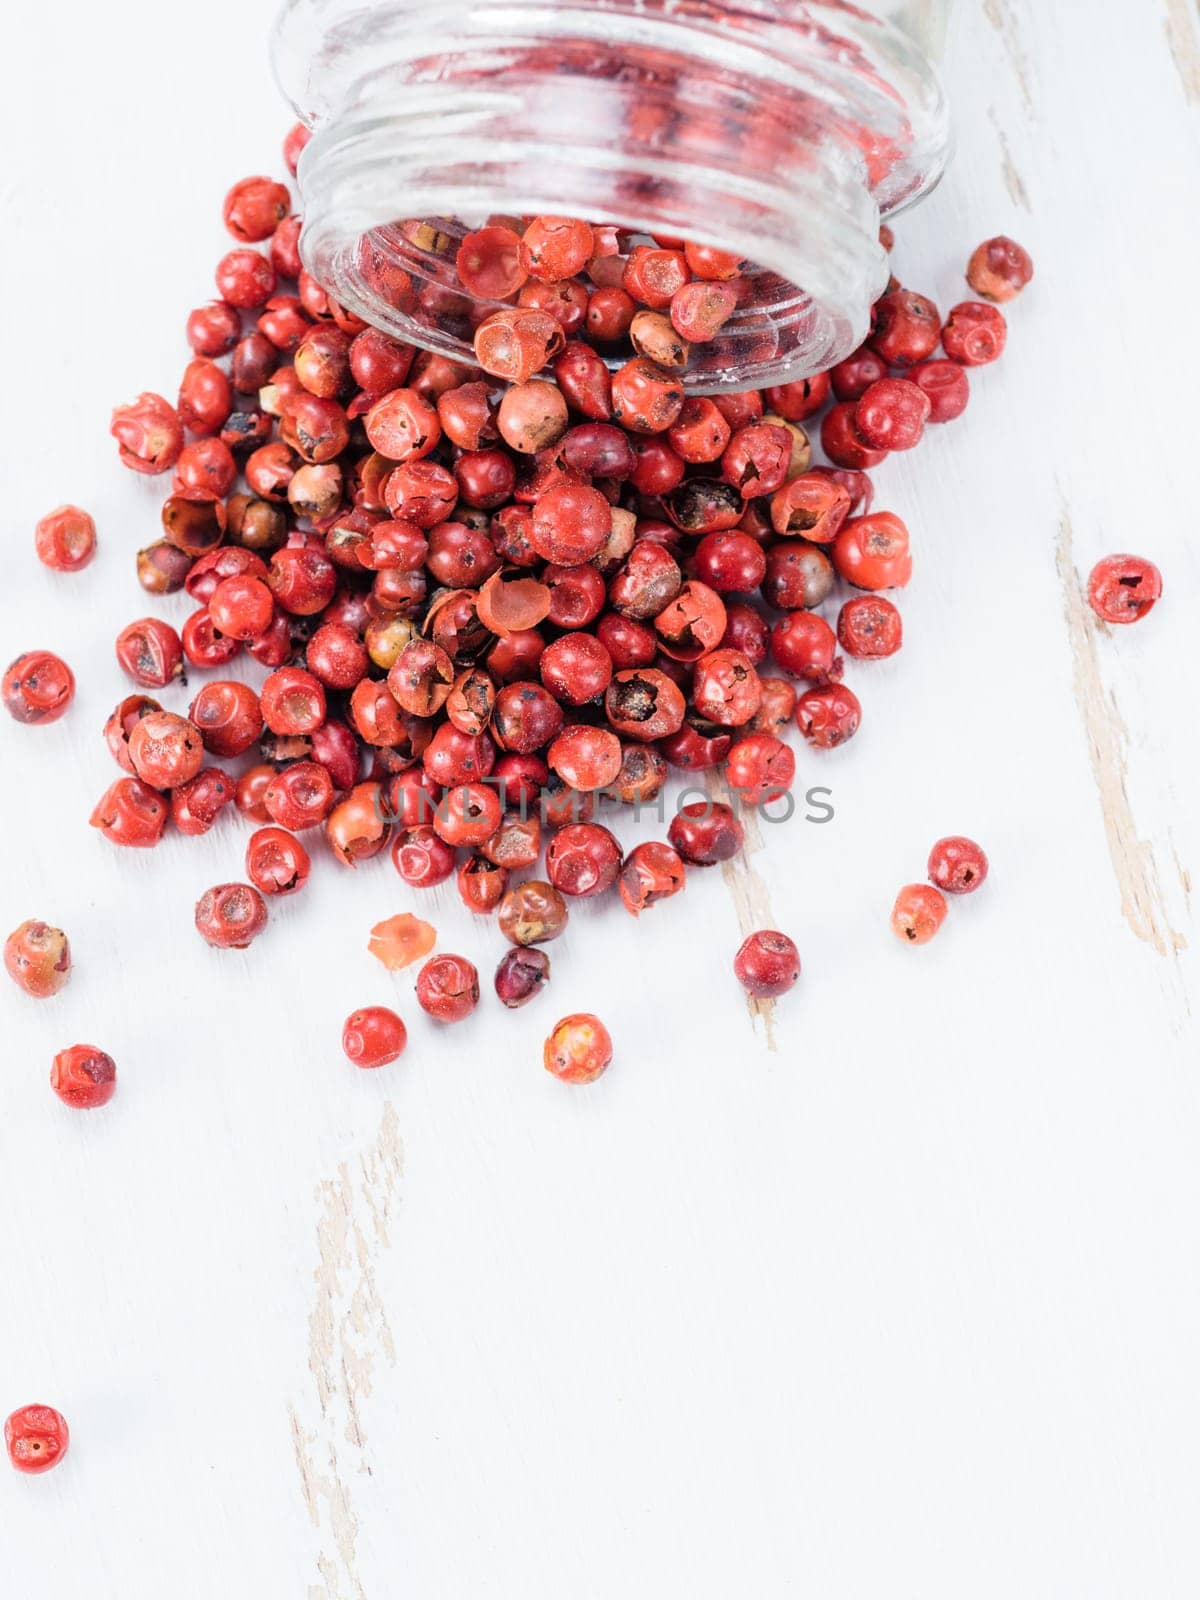 Dried pink pepper berries poured from glass jar on white wooden cutting board. Close up view of pink peppercorn poured on vintage wooden table. Copy space. Top view or flat-lay.